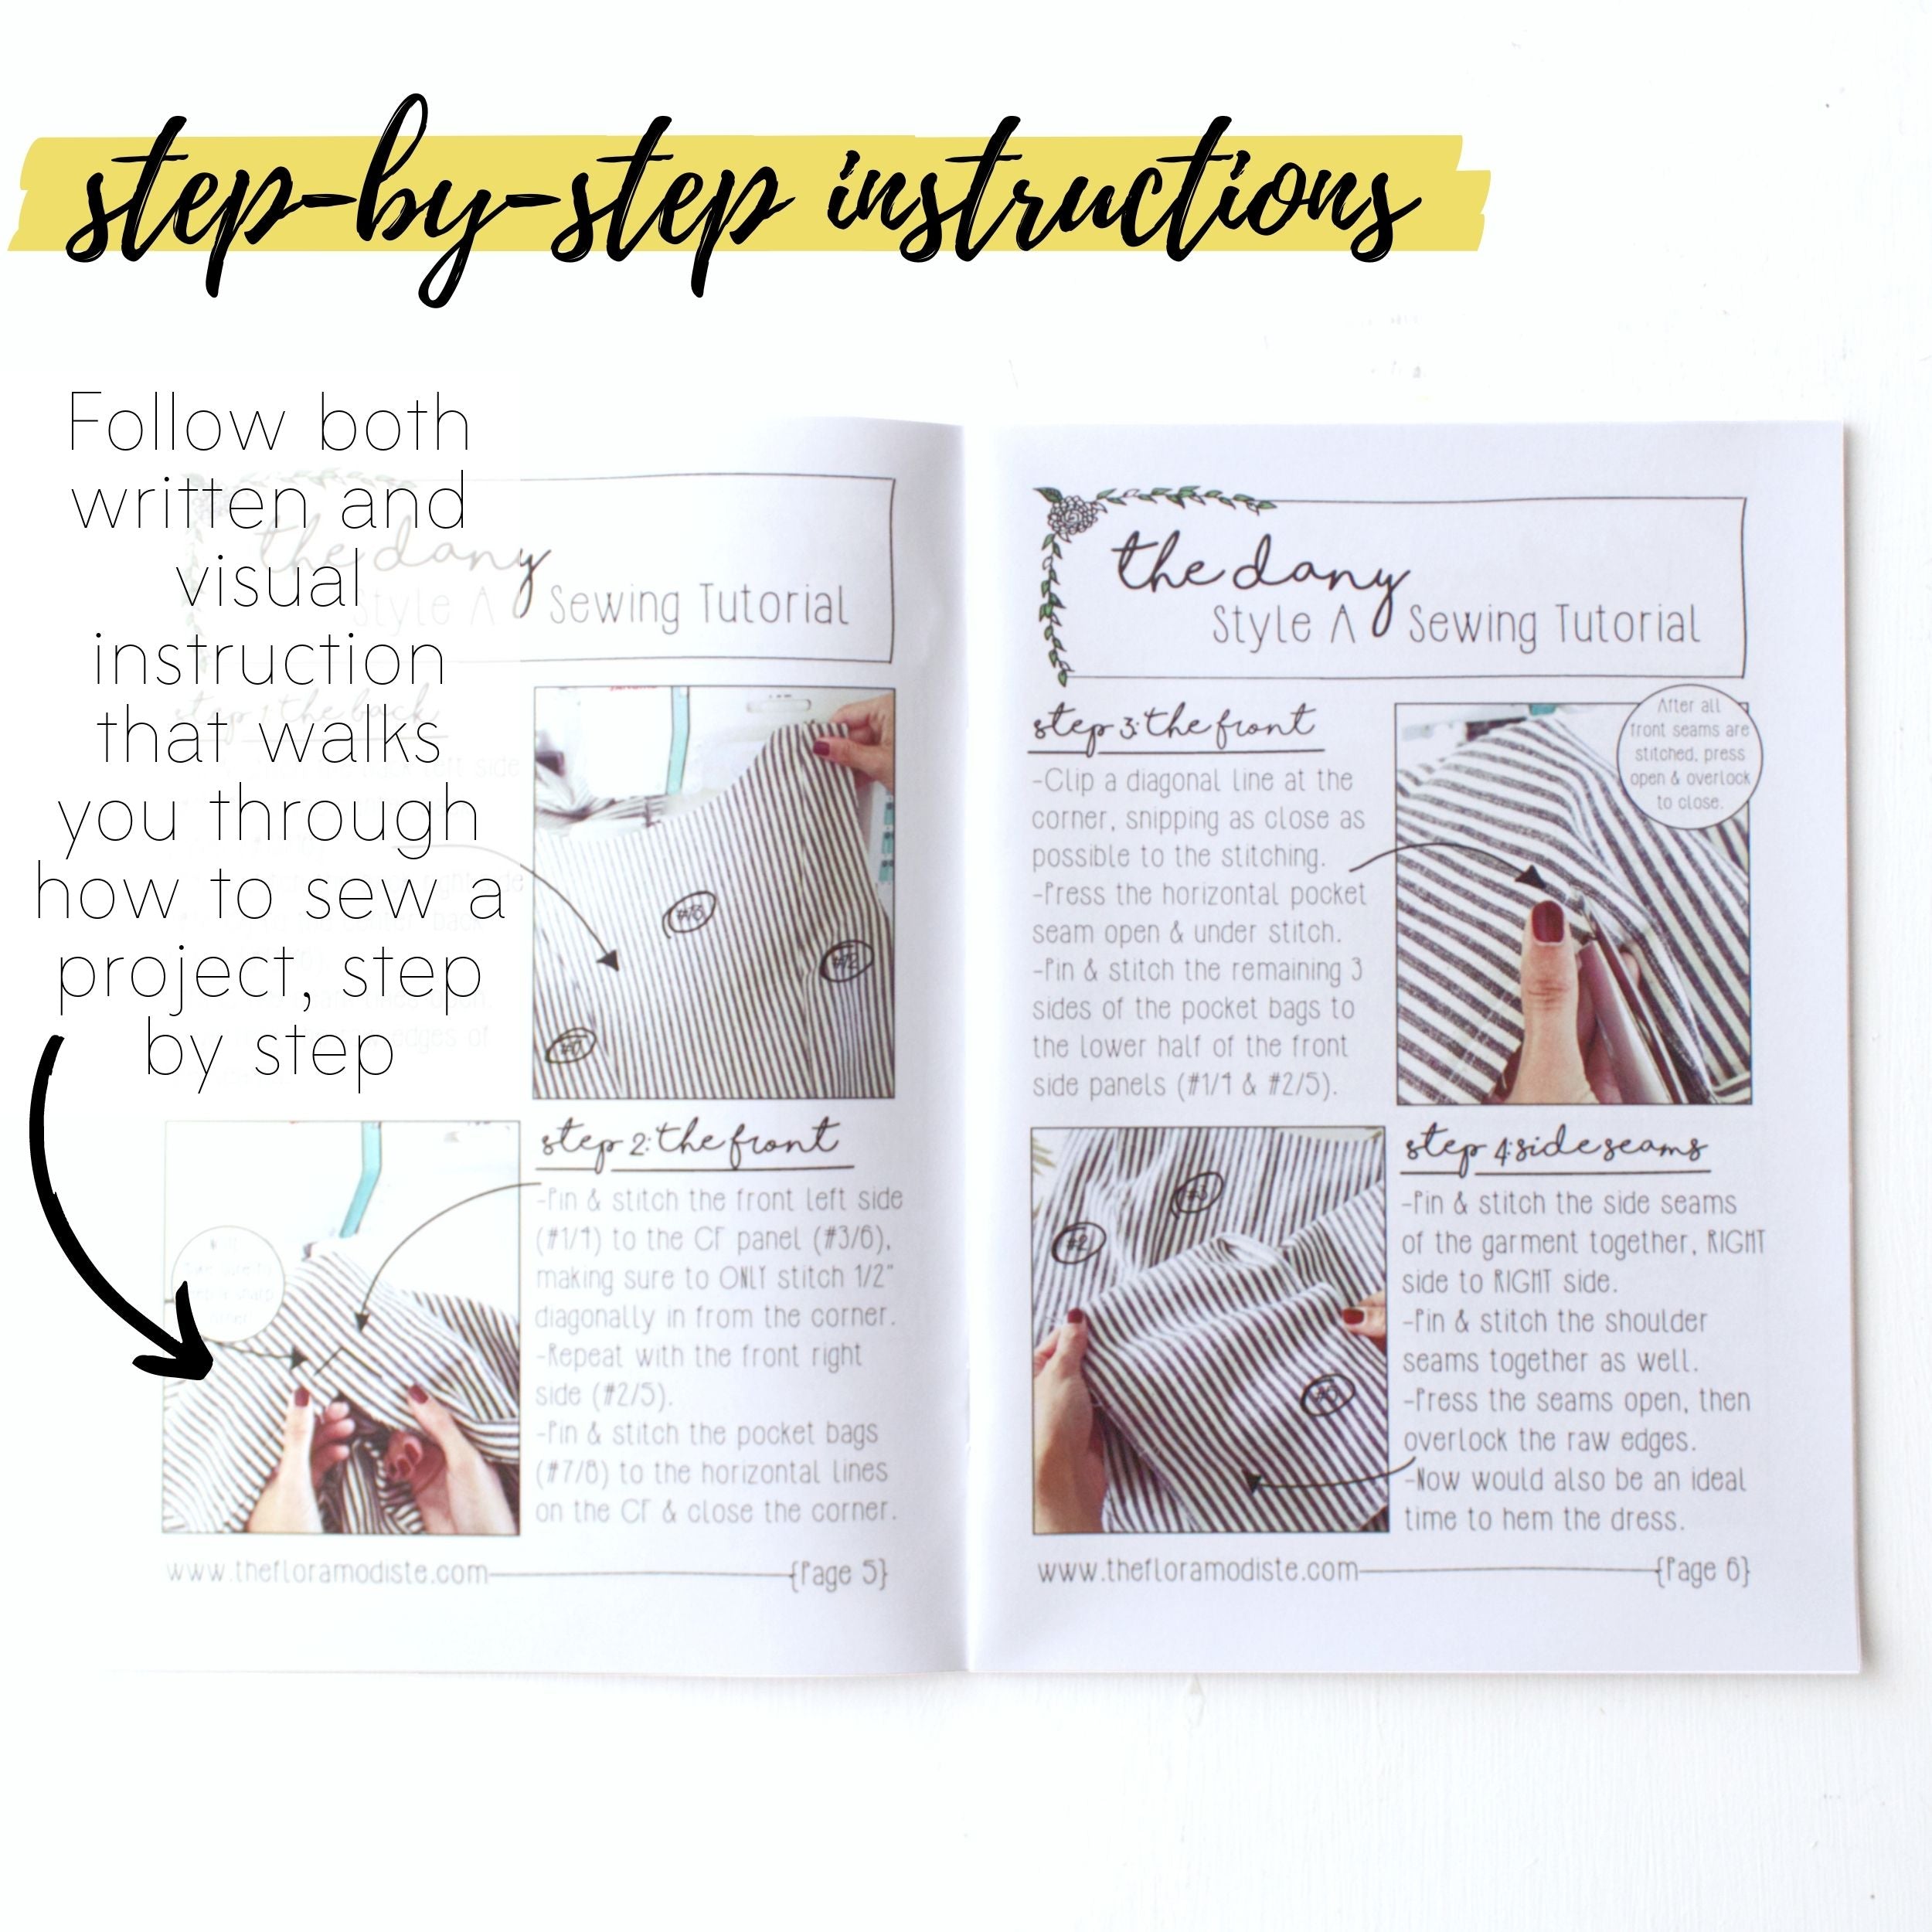 How to read a sewing pattern: The instruction manual